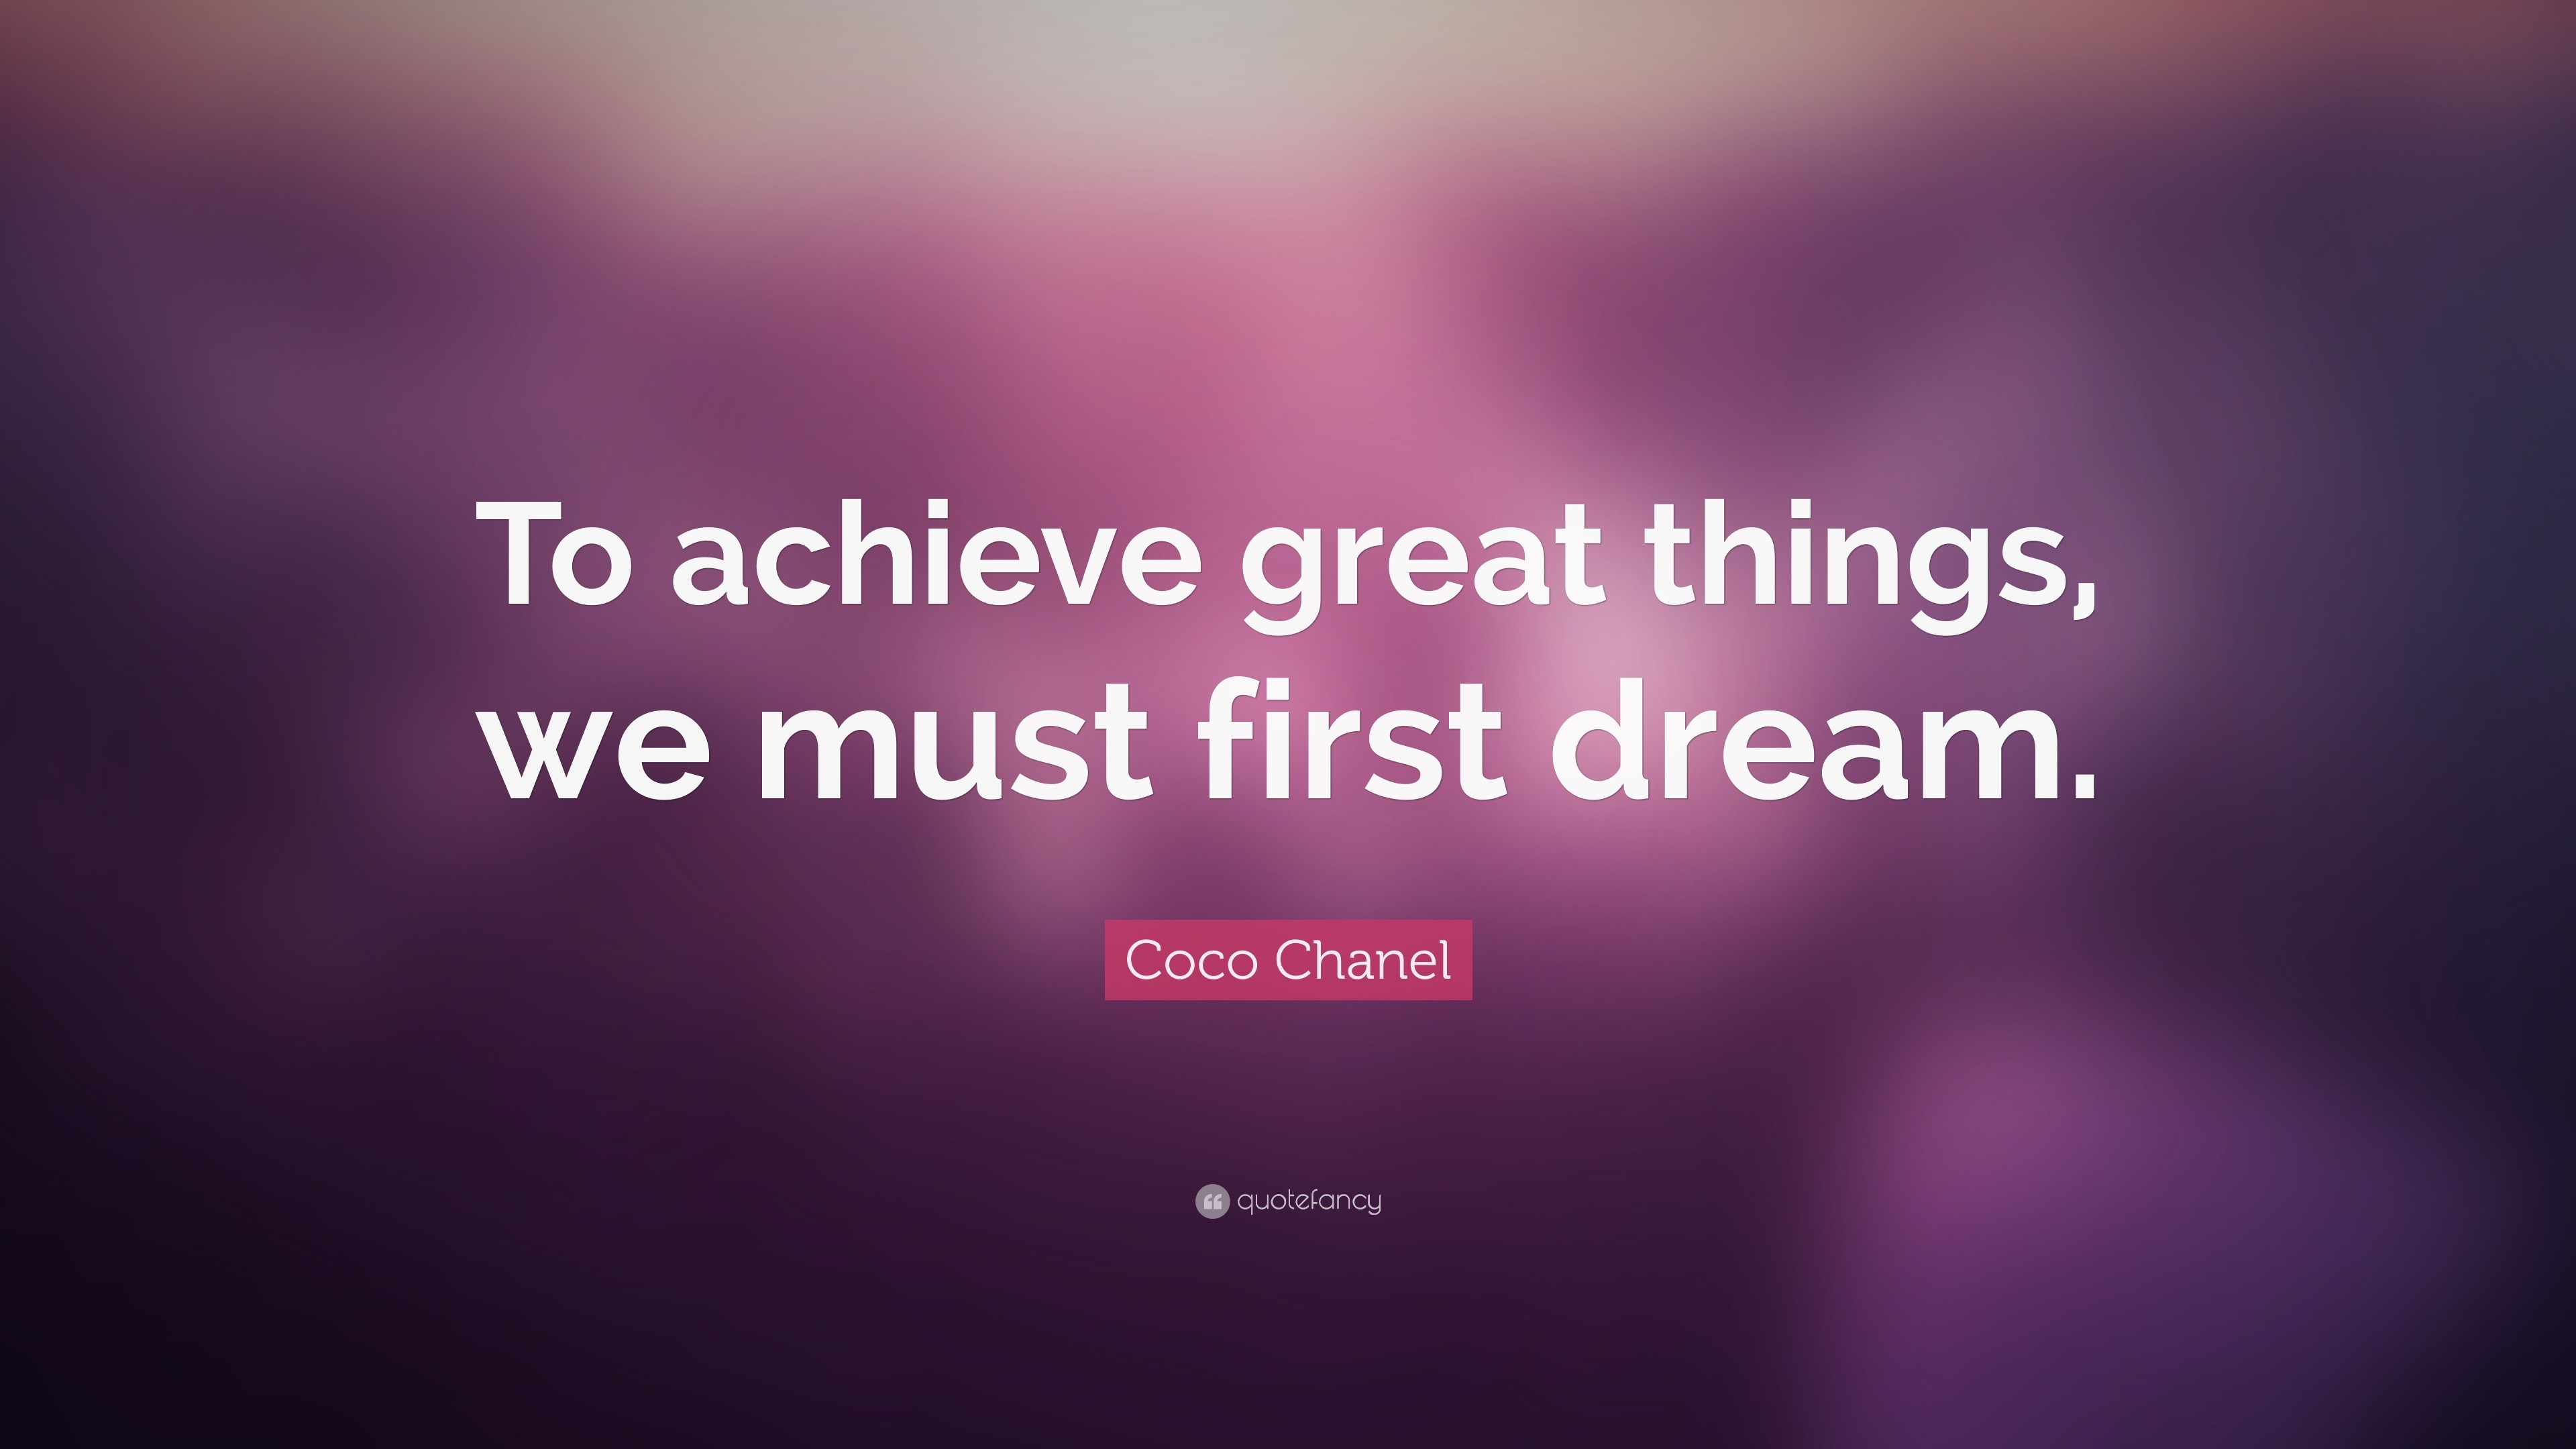 Coco Chanel Quote: “To achieve great things, we must first dream.”